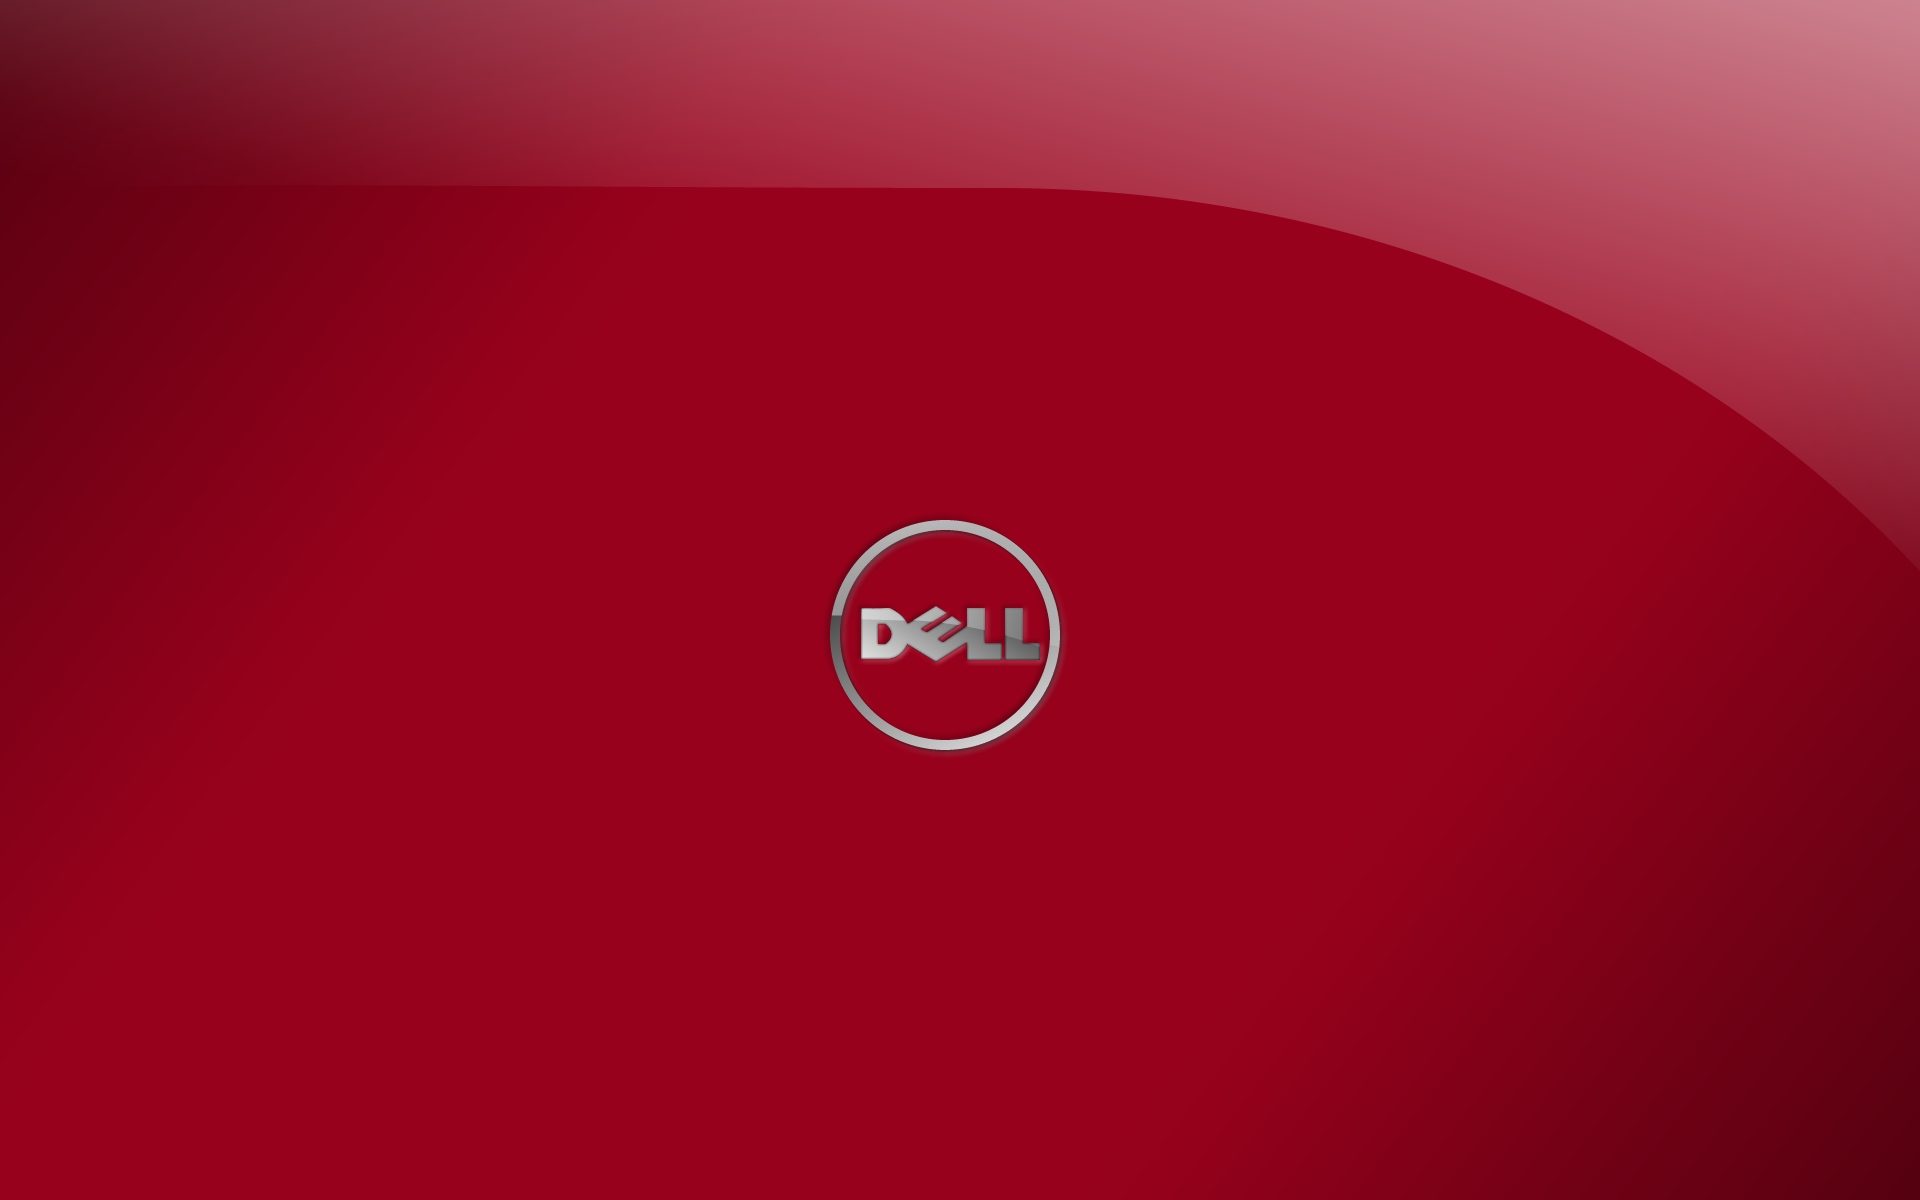 Dell Red Color Logo Wallpaper HD Background For Mobile And Pc